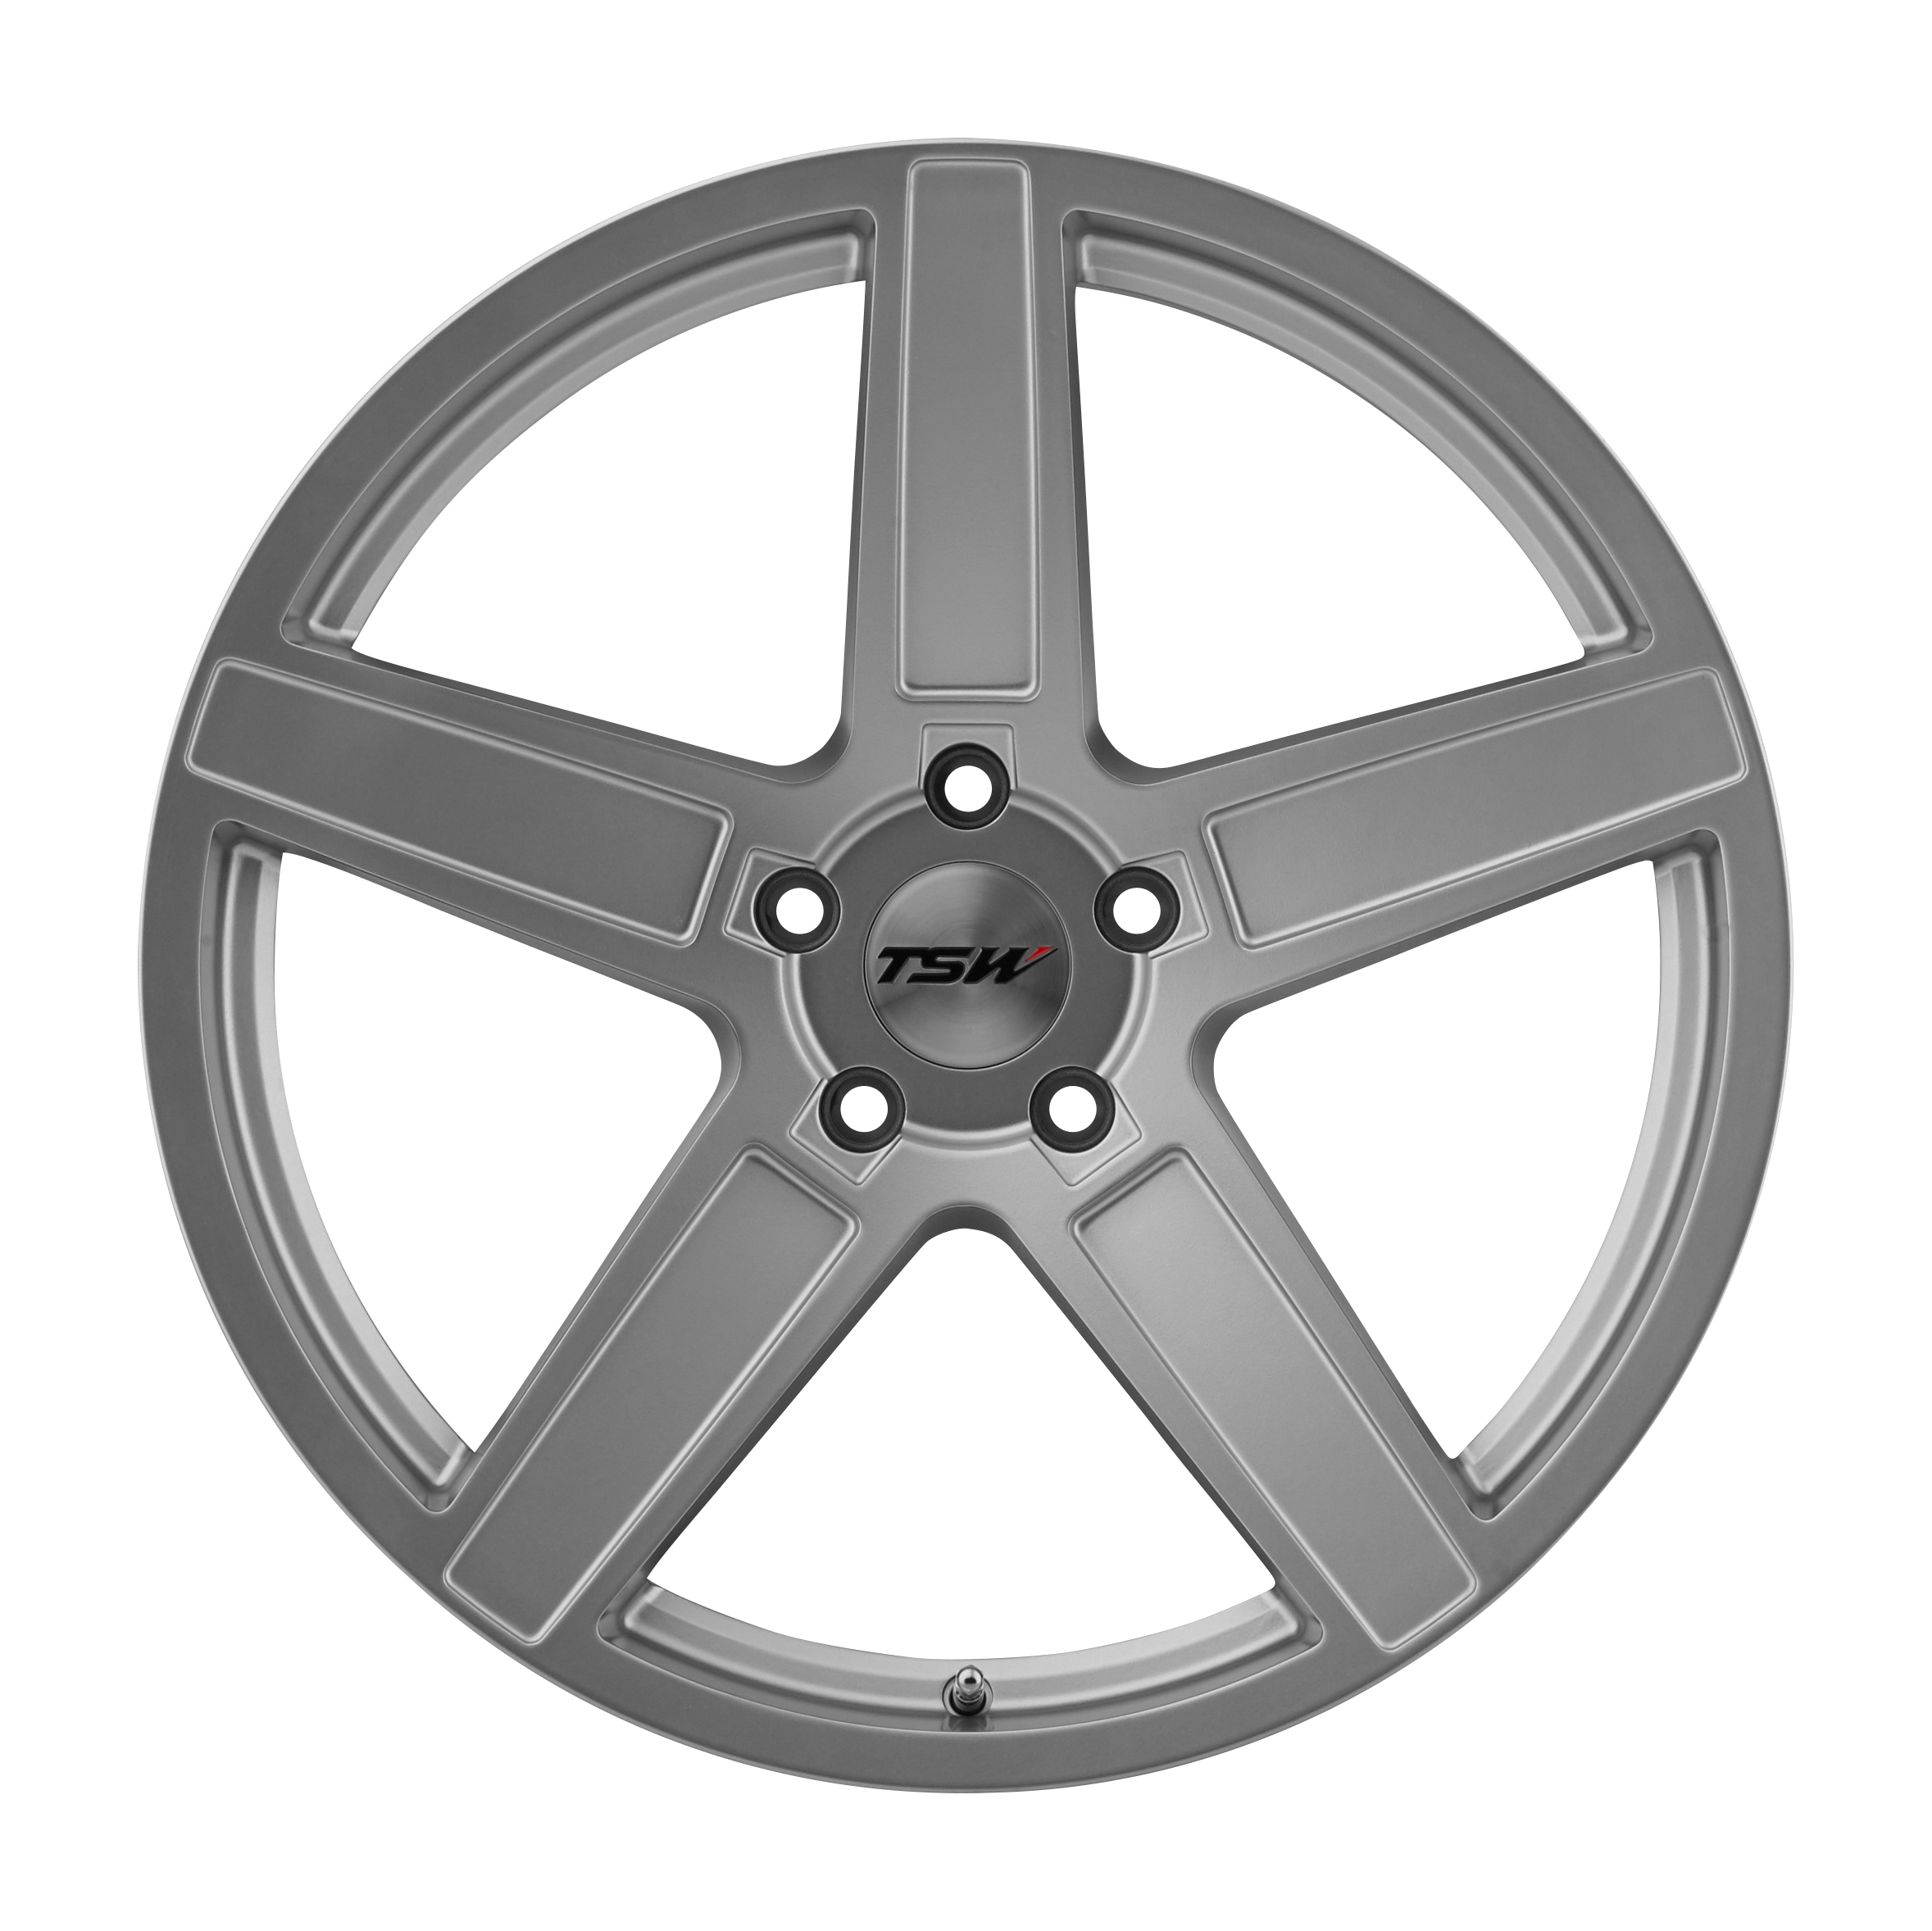 Introducing the Ascent Alloy Wheel by TSW in Matte Titanium Silver